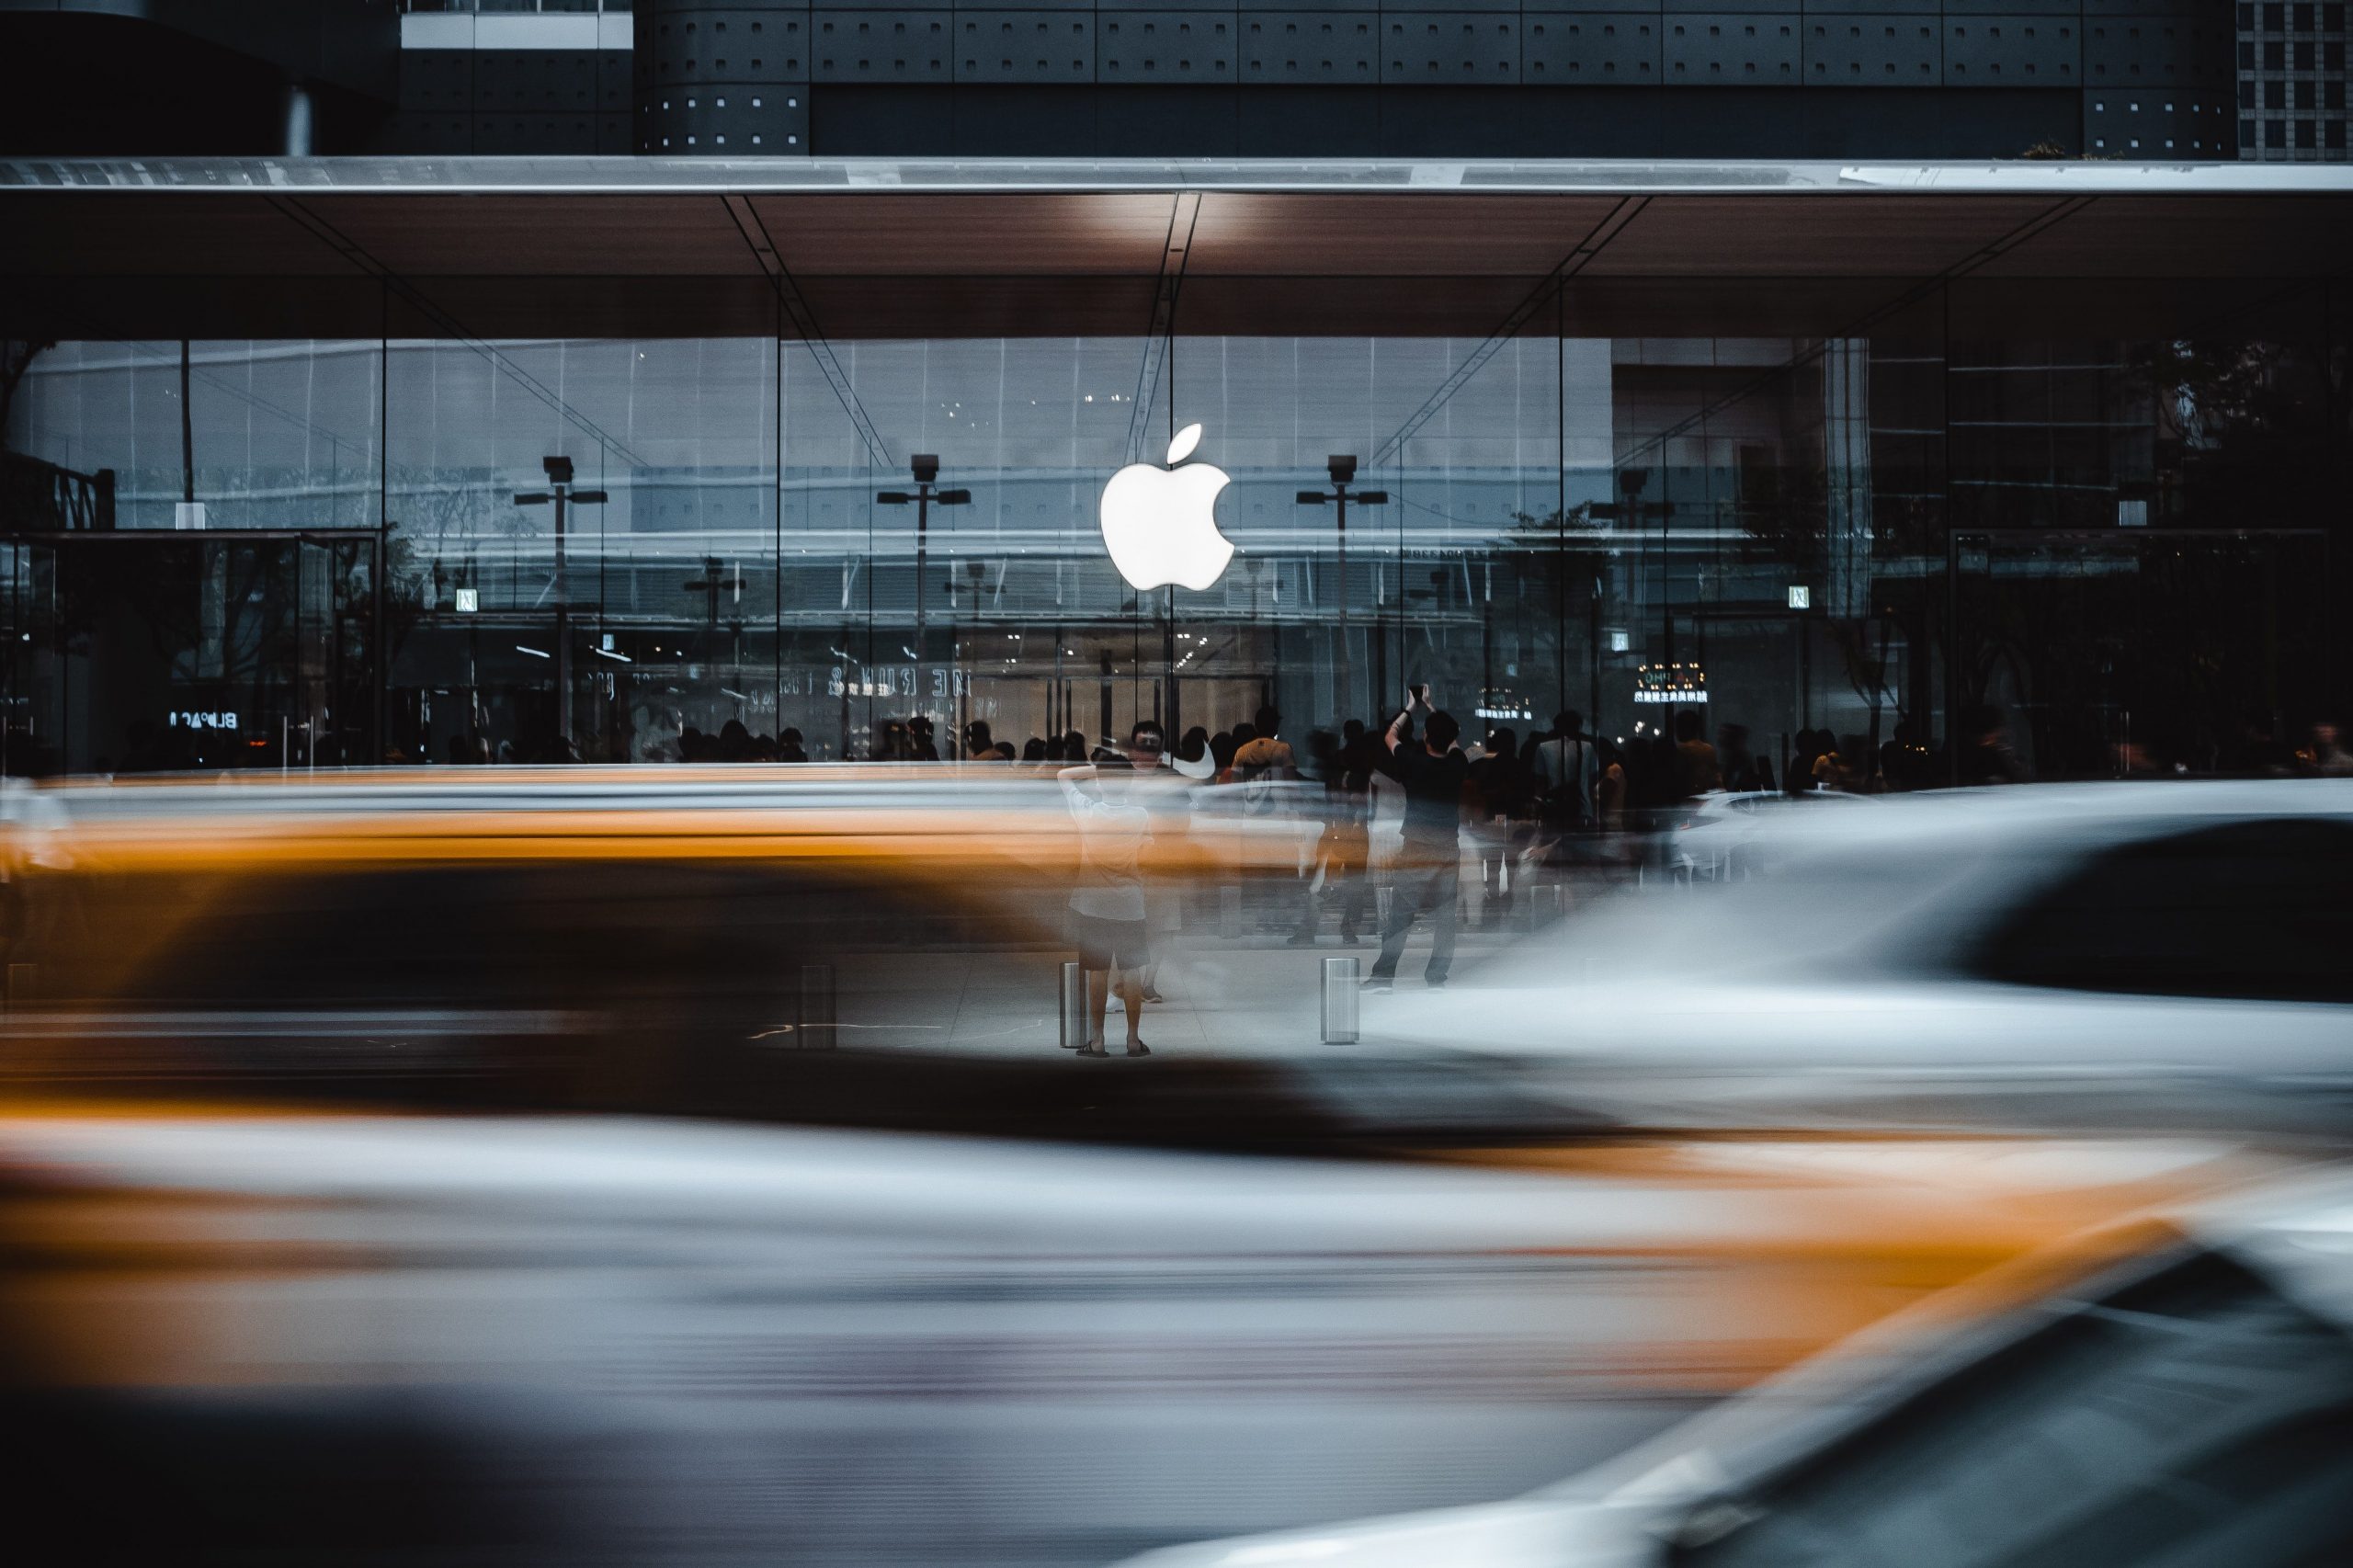 Apple car tech at Apple Event? Conflicting reports emerge